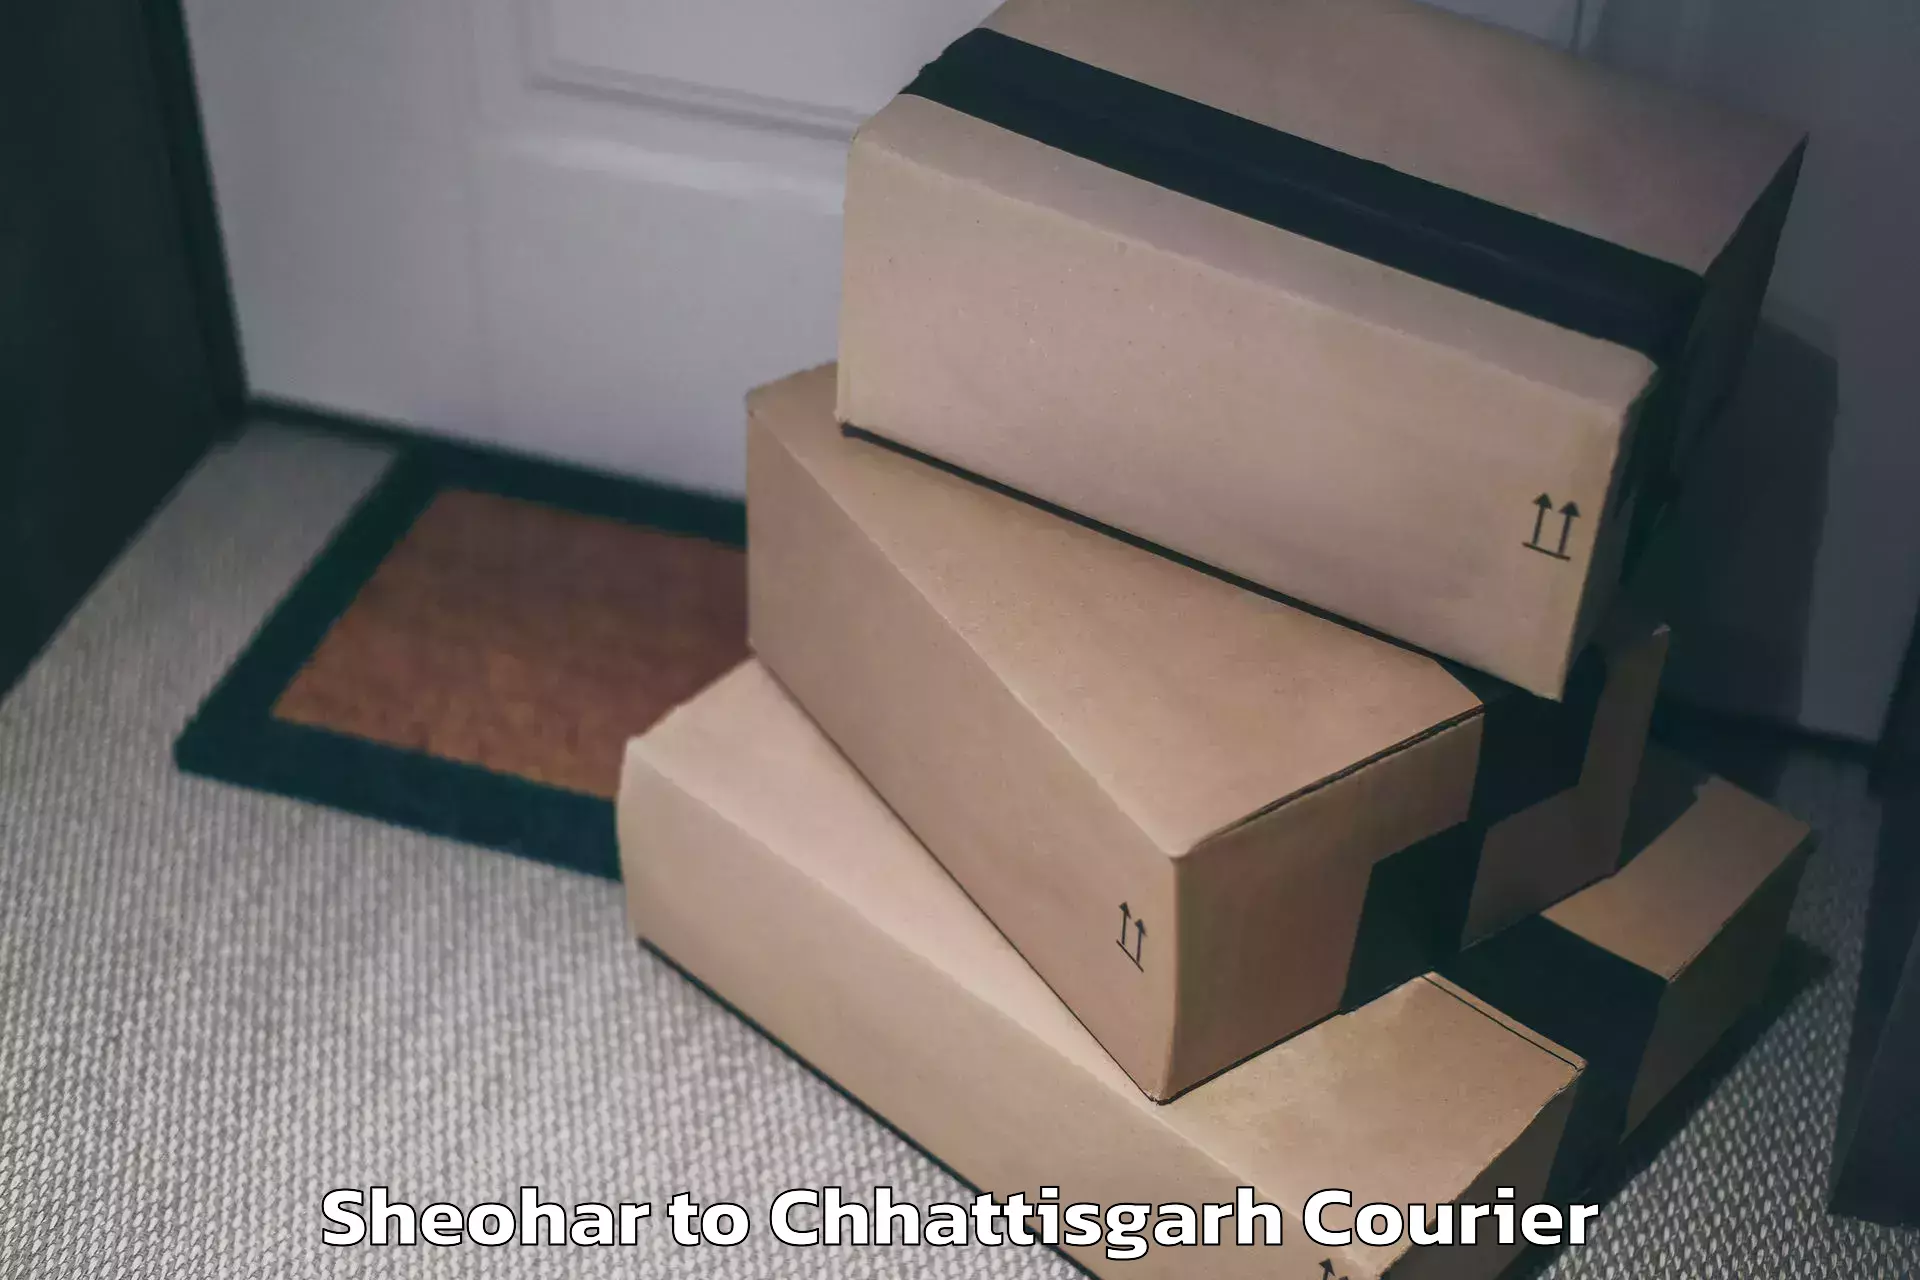 Luggage delivery network Sheohar to Chhattisgarh